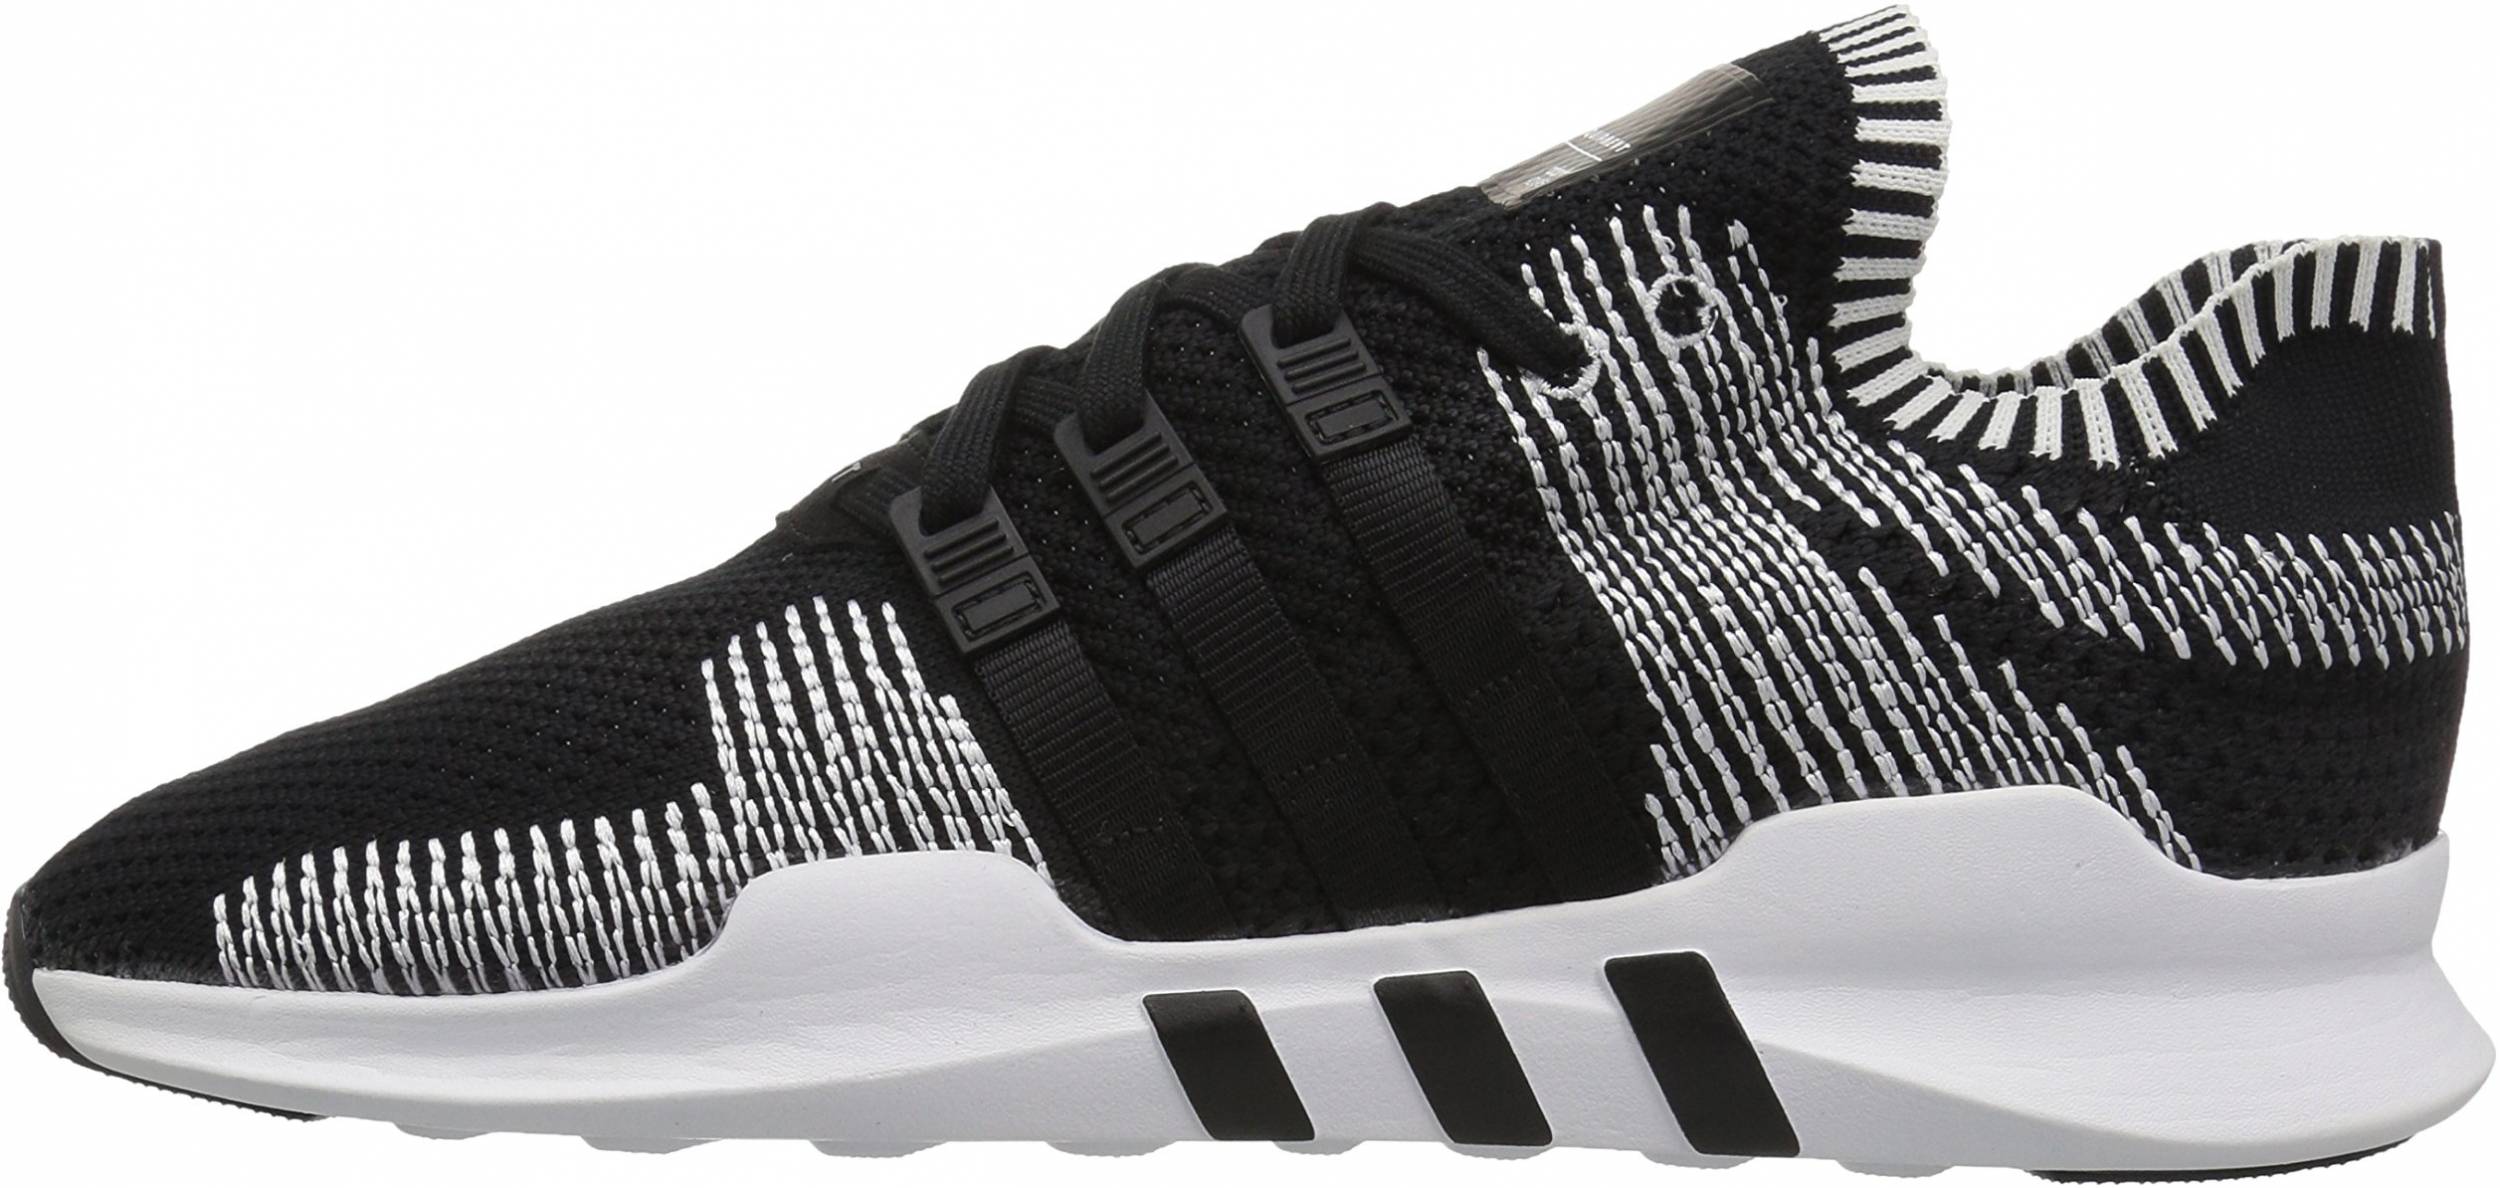 Adidas EQT Support ADV Primeknit sneakers in 5 colors (only $65 ...